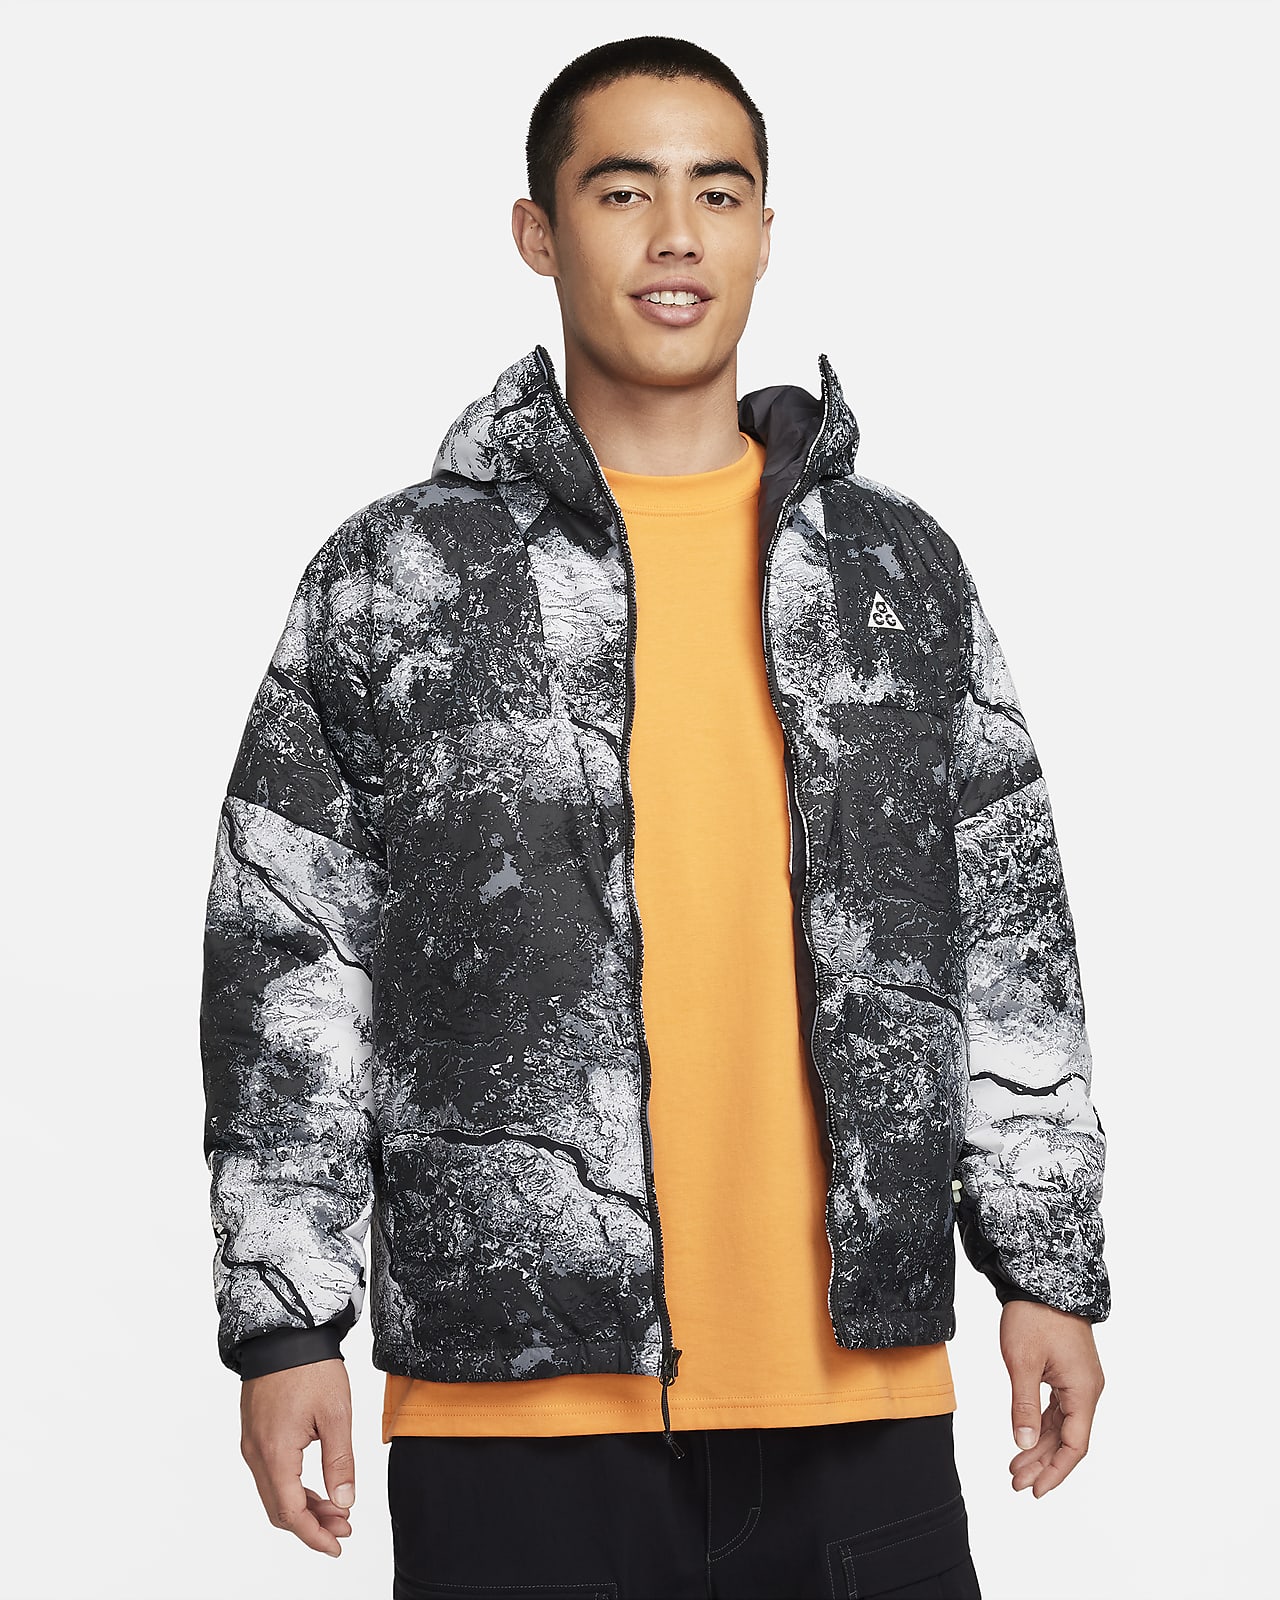 Nike ACG "Rope de Dope" Men's Therma-FIT ADV Allover Print Jacket